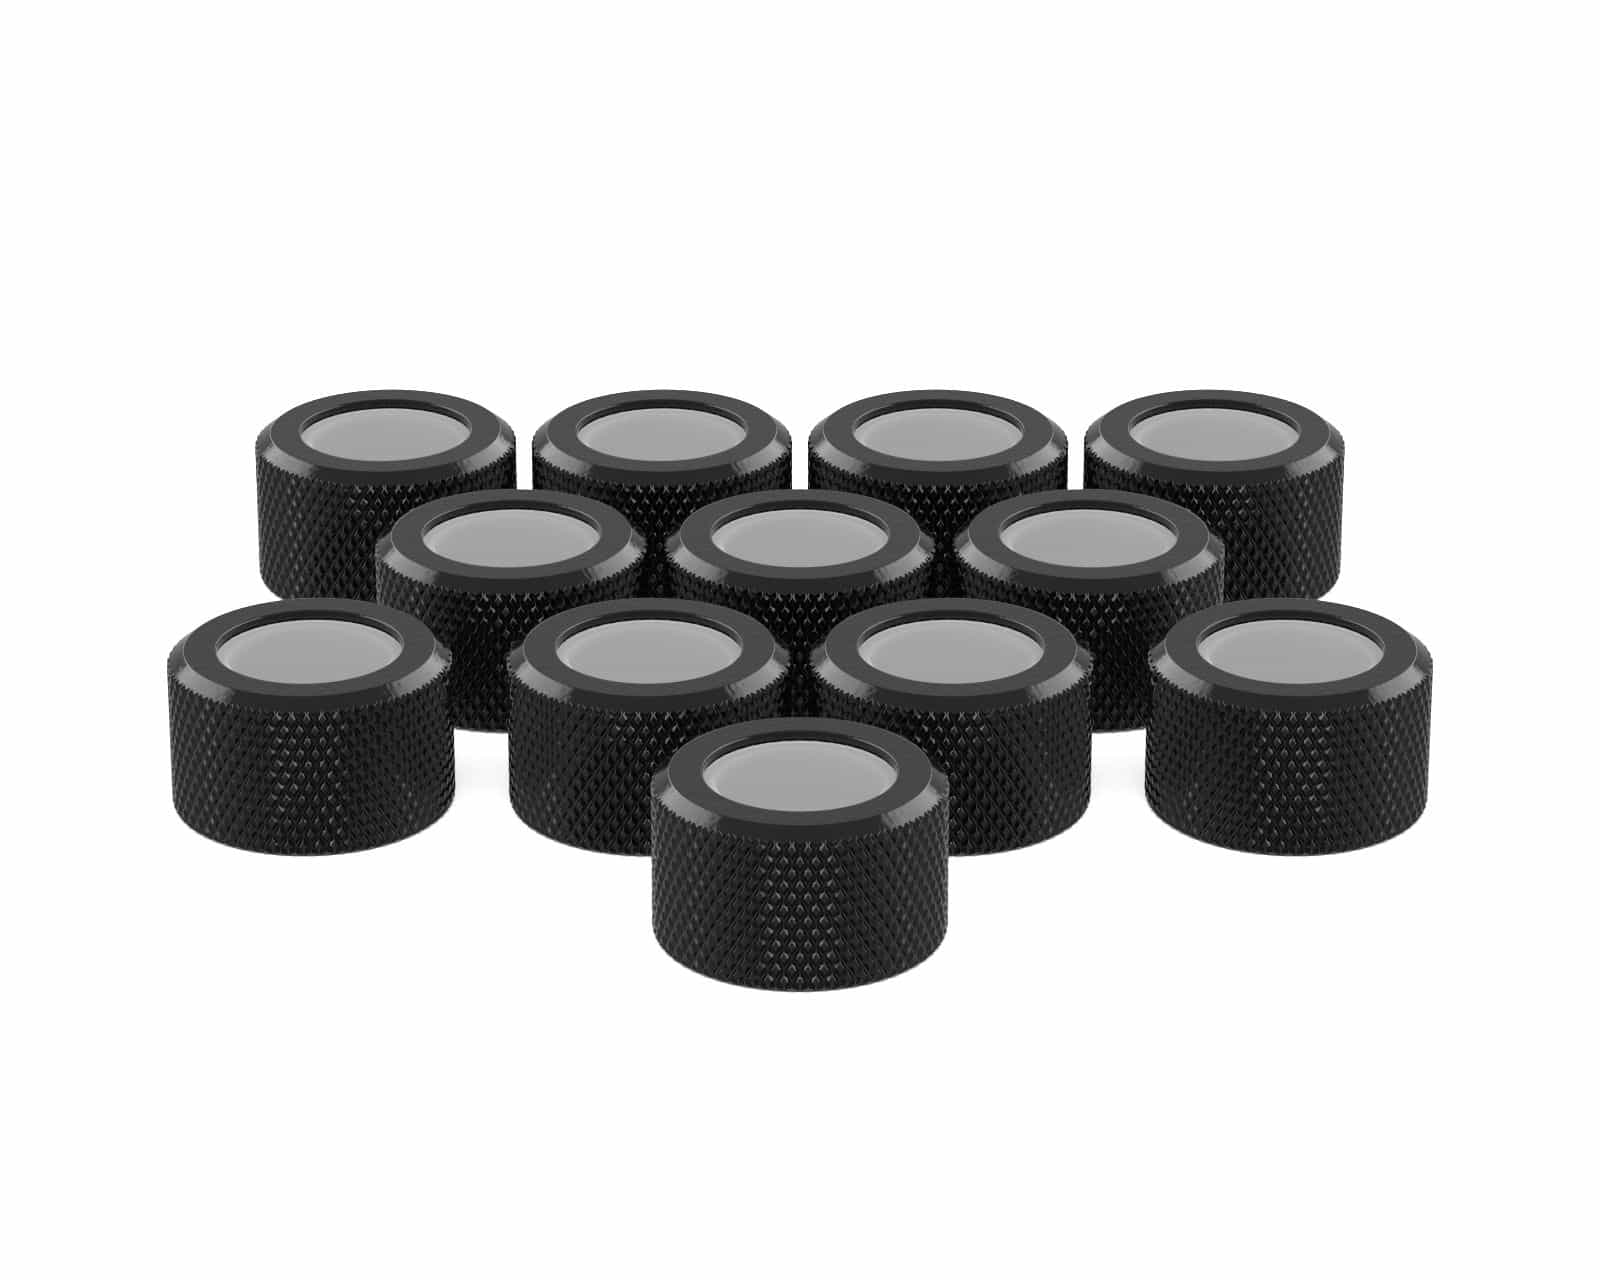 PrimoChill RMSX Replacement Cap Switch Over Kit - 16mm - PrimoChill - KEEPING IT COOL Satin Black